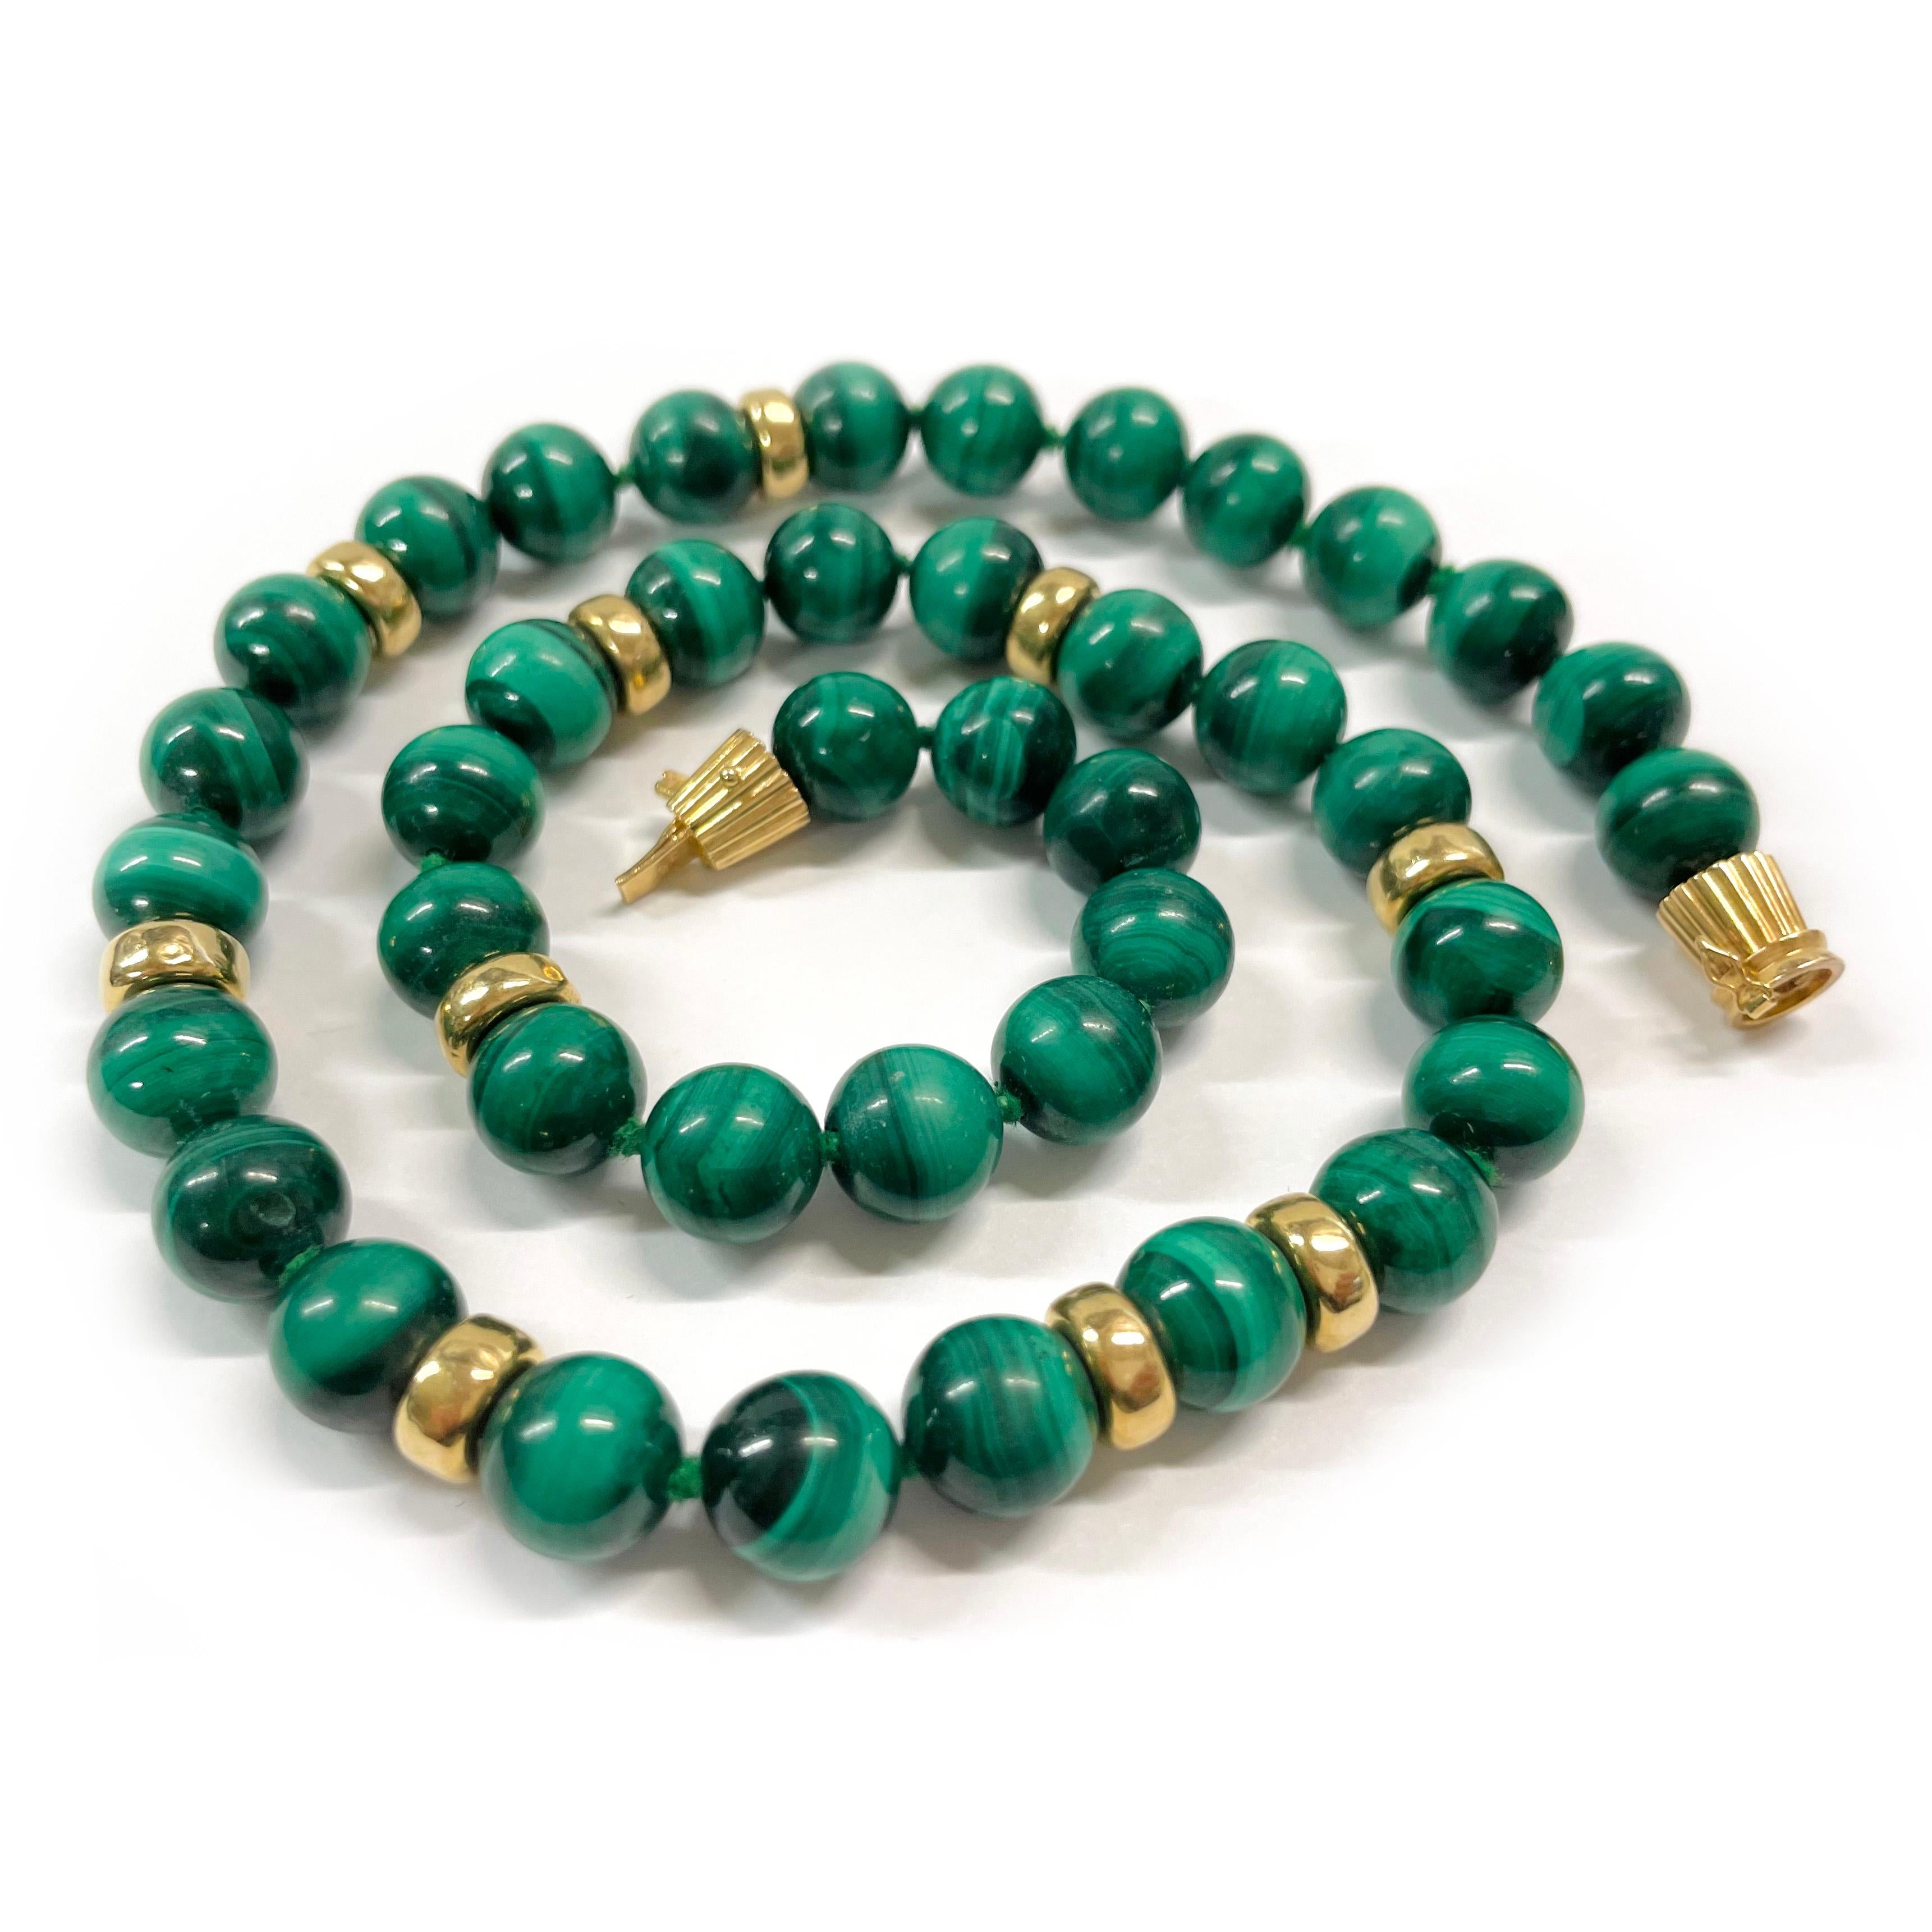 14 Karat Yellow Gold Malachite Beaded Necklace. The necklace features forty-one round malachite beads and ten rondelle gold beads in a single strand. The malachite beads measure 10mm in diameter and the rondelle gold beads measure 8.5mm. The